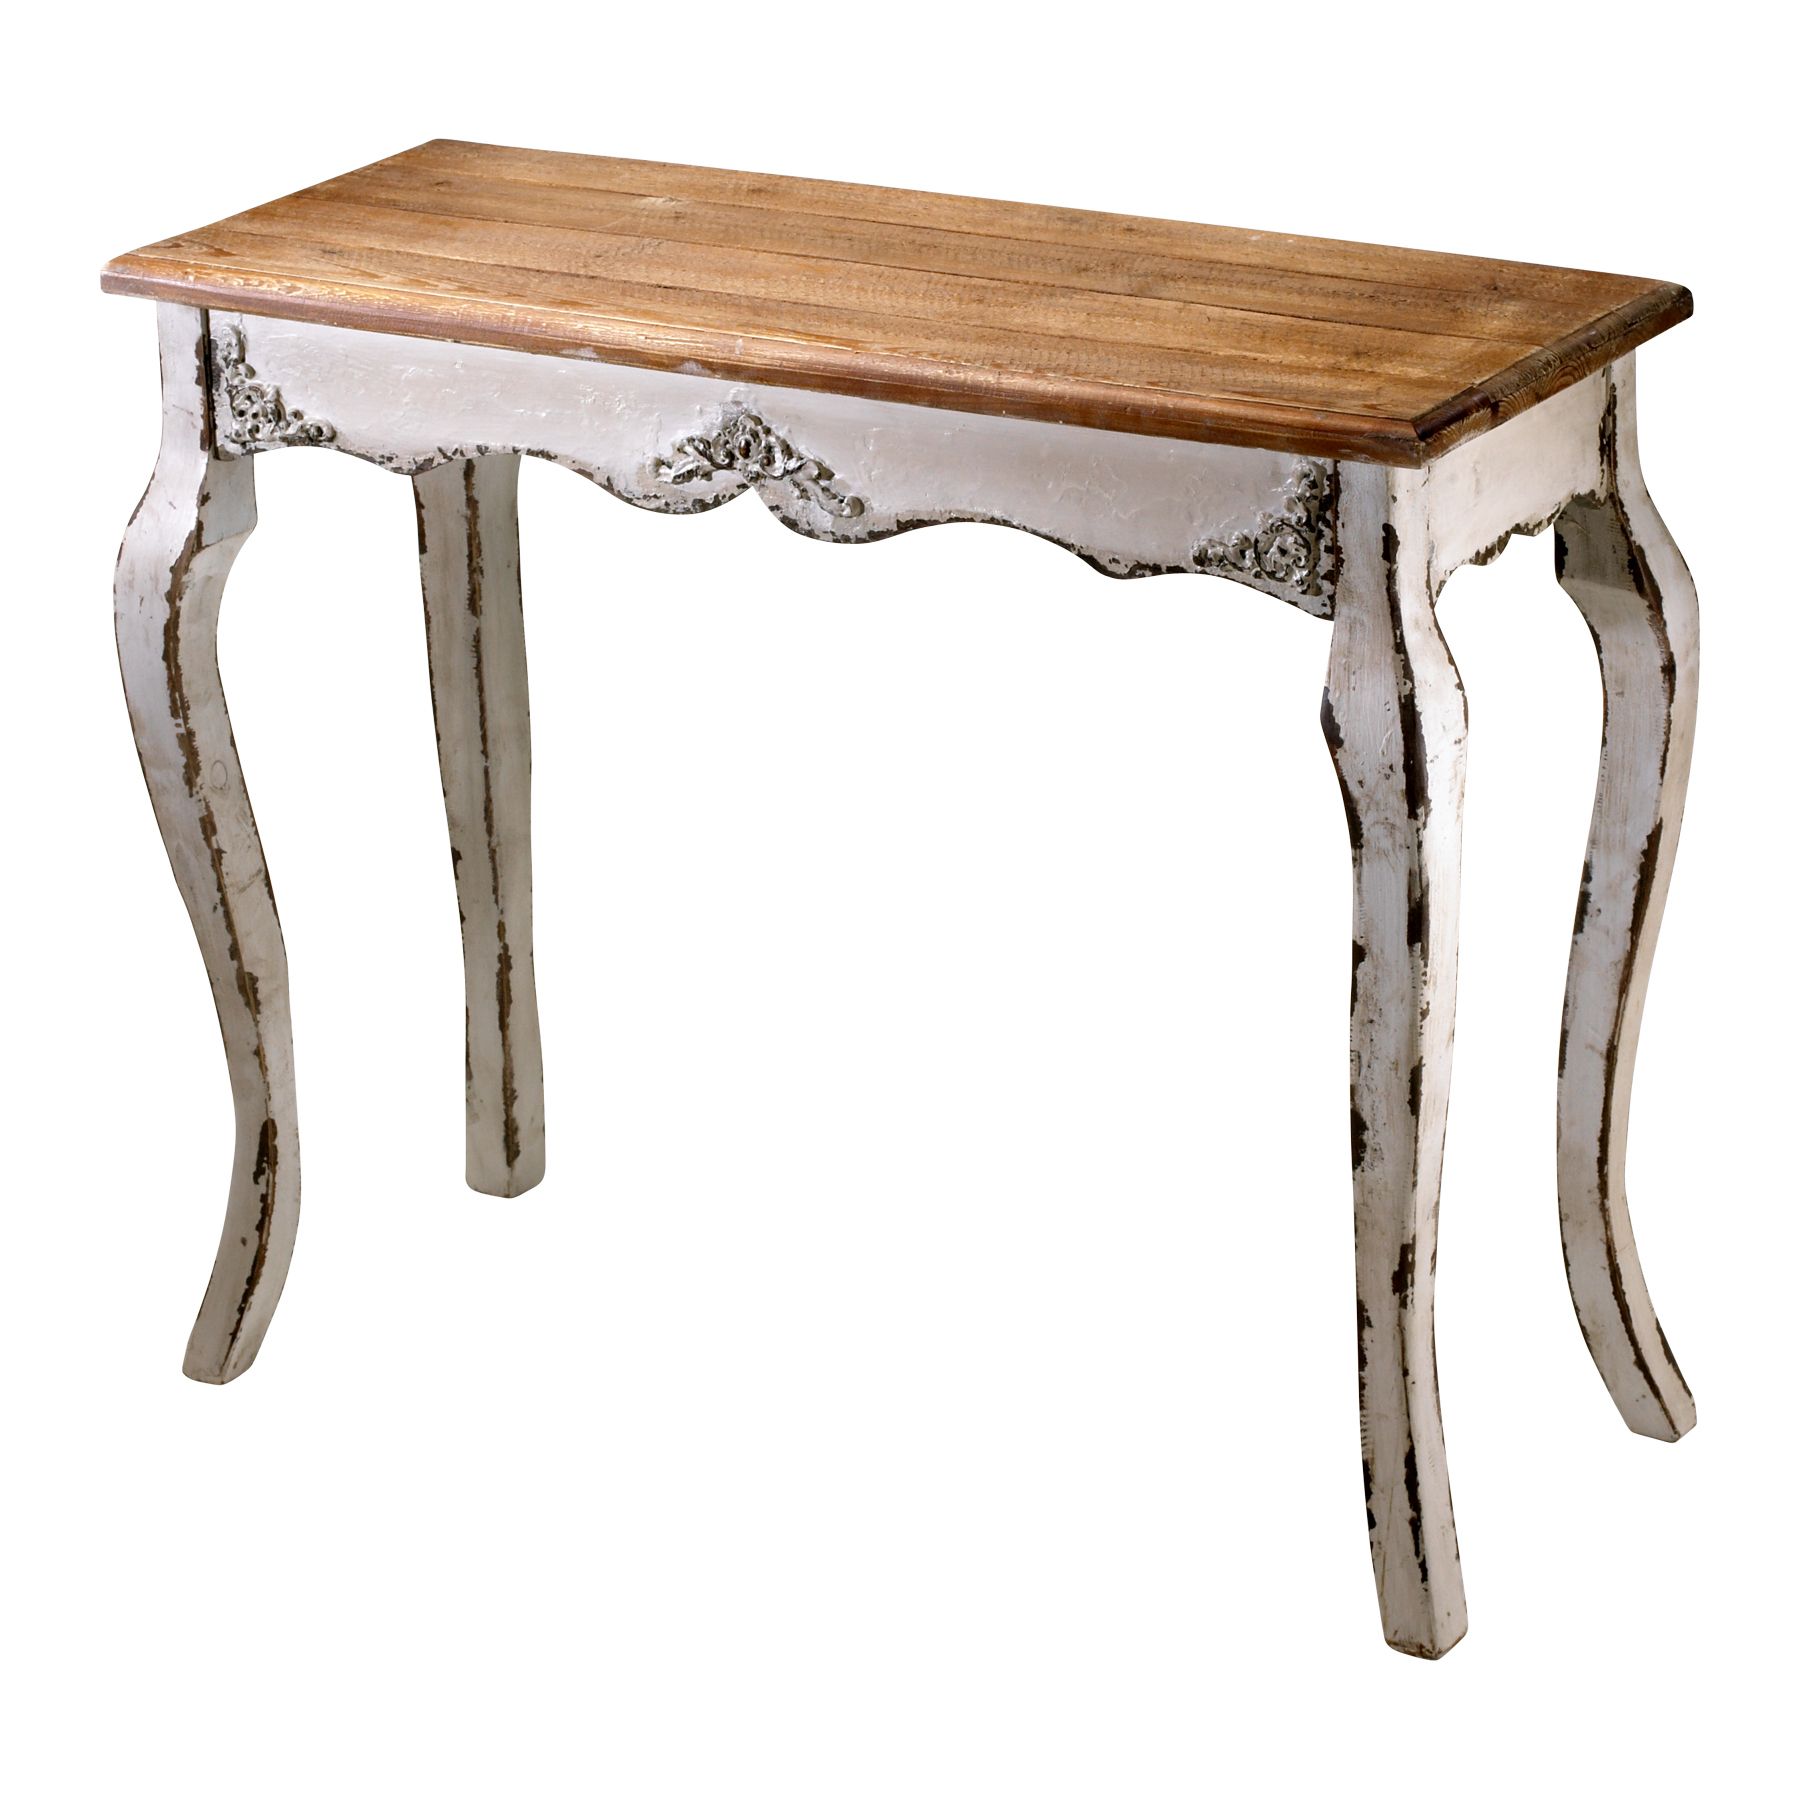 Current Bluestone Console Tables For Distressed Console Tables All About House Design Best Bluestone (View 15 of 20)